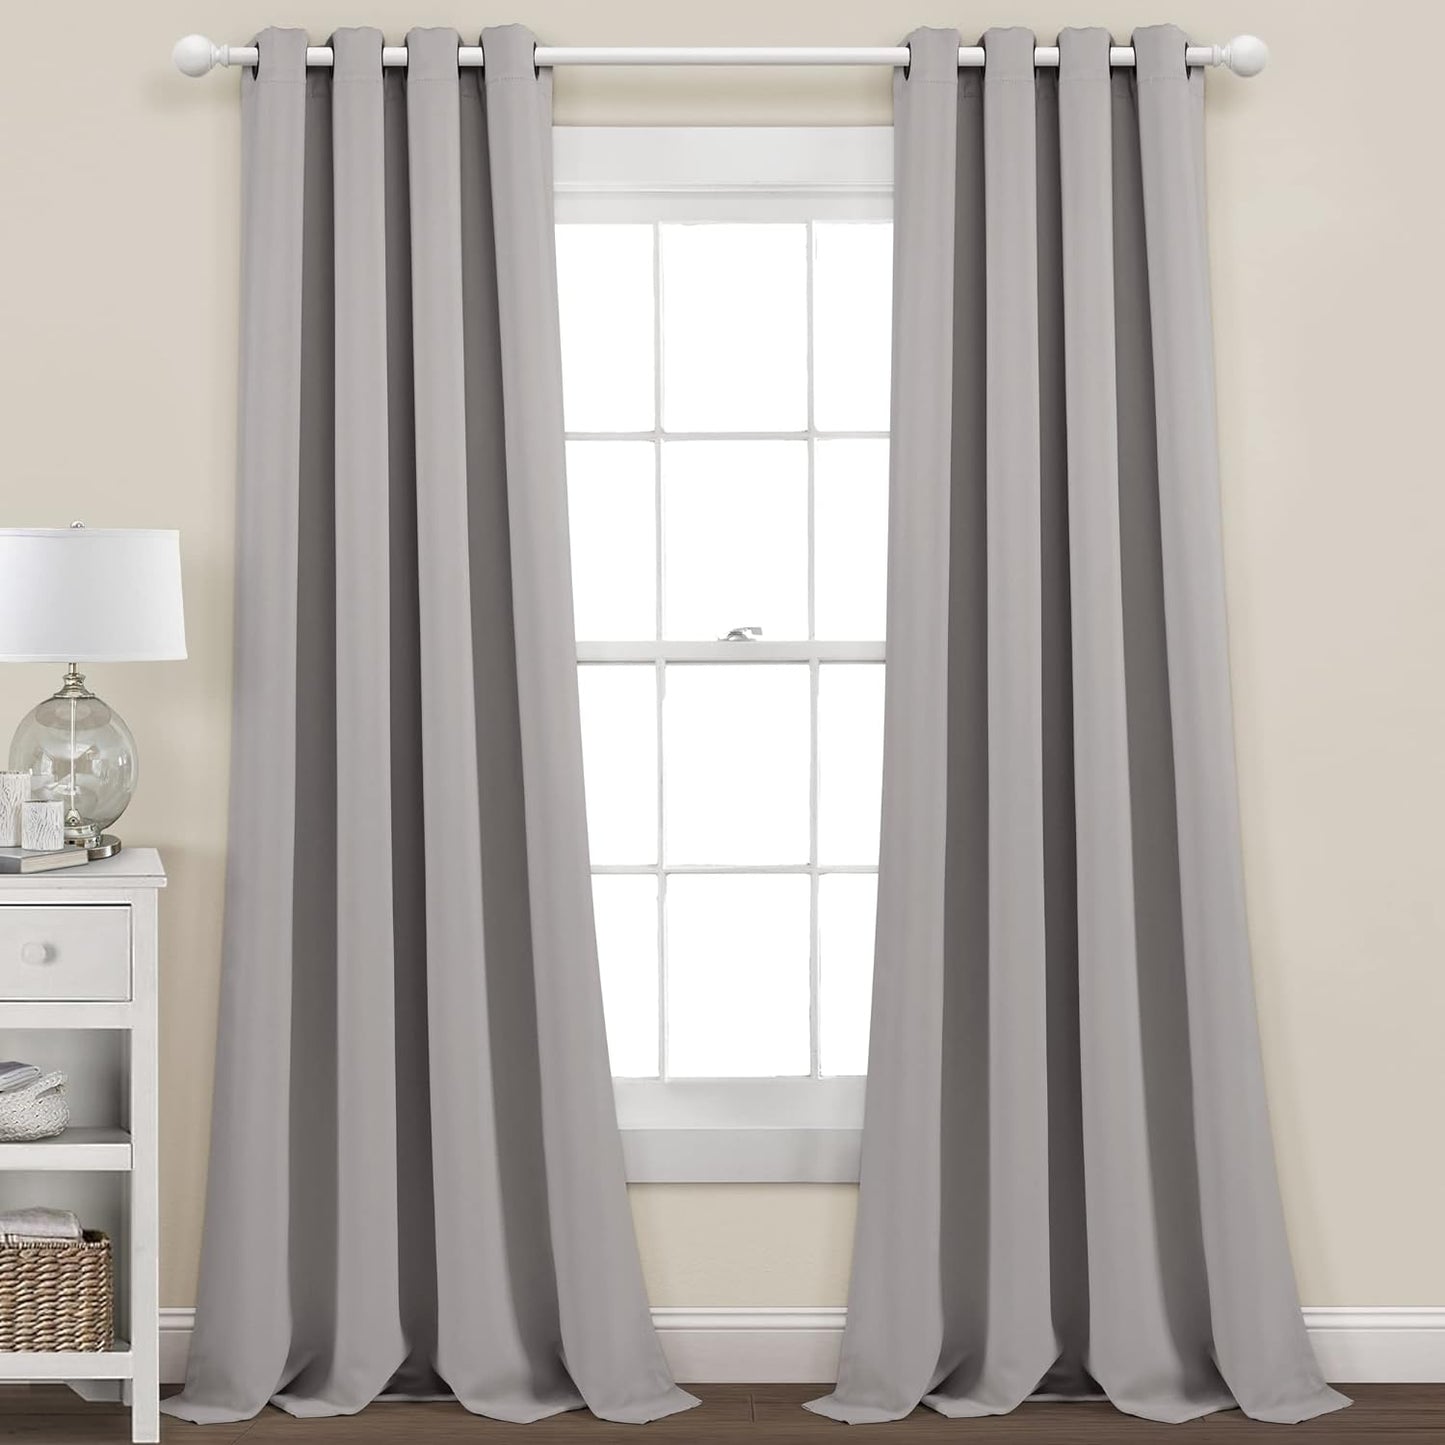 Lush Decor Insulated Grommet Blackout Window Curtain Panels, Pair, 52" W X 120" L, Wheat - Classic Modern Design - 120 Inch Curtains - Extra Long Curtains for Living Room, Bedroom, or Dining Room  Triangle Home Fashions Grey 52"W X 84"L 